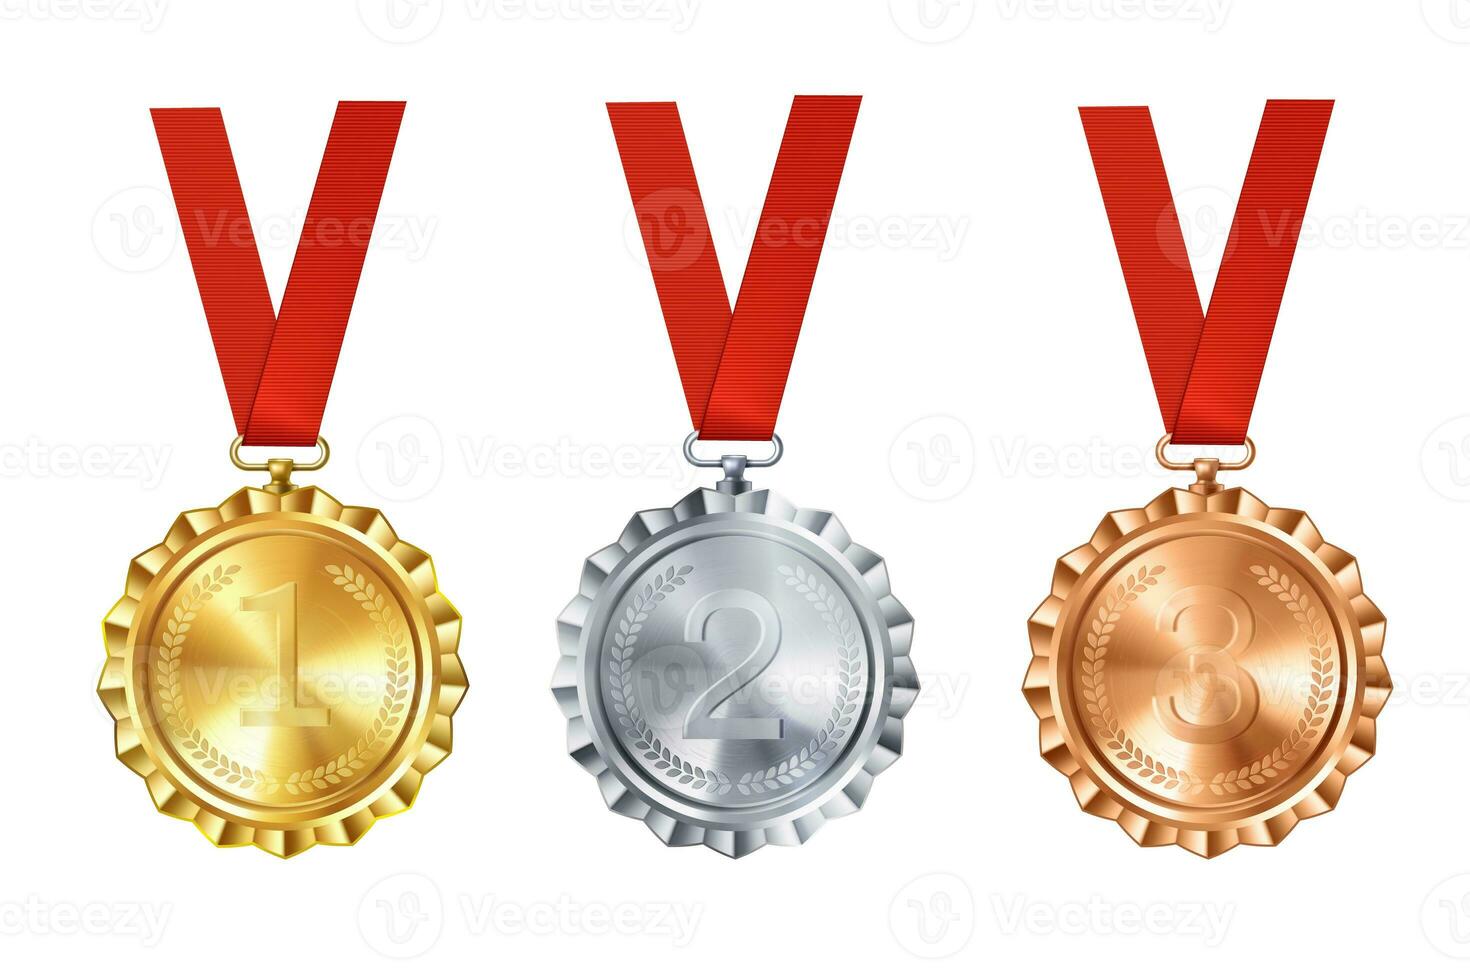 Realistic set of golden, silver, and bronze medals on red ribbons. Sports competition awards for 1st, 2nd, and 3rd place. Championship rewards for achievements and victories. photo